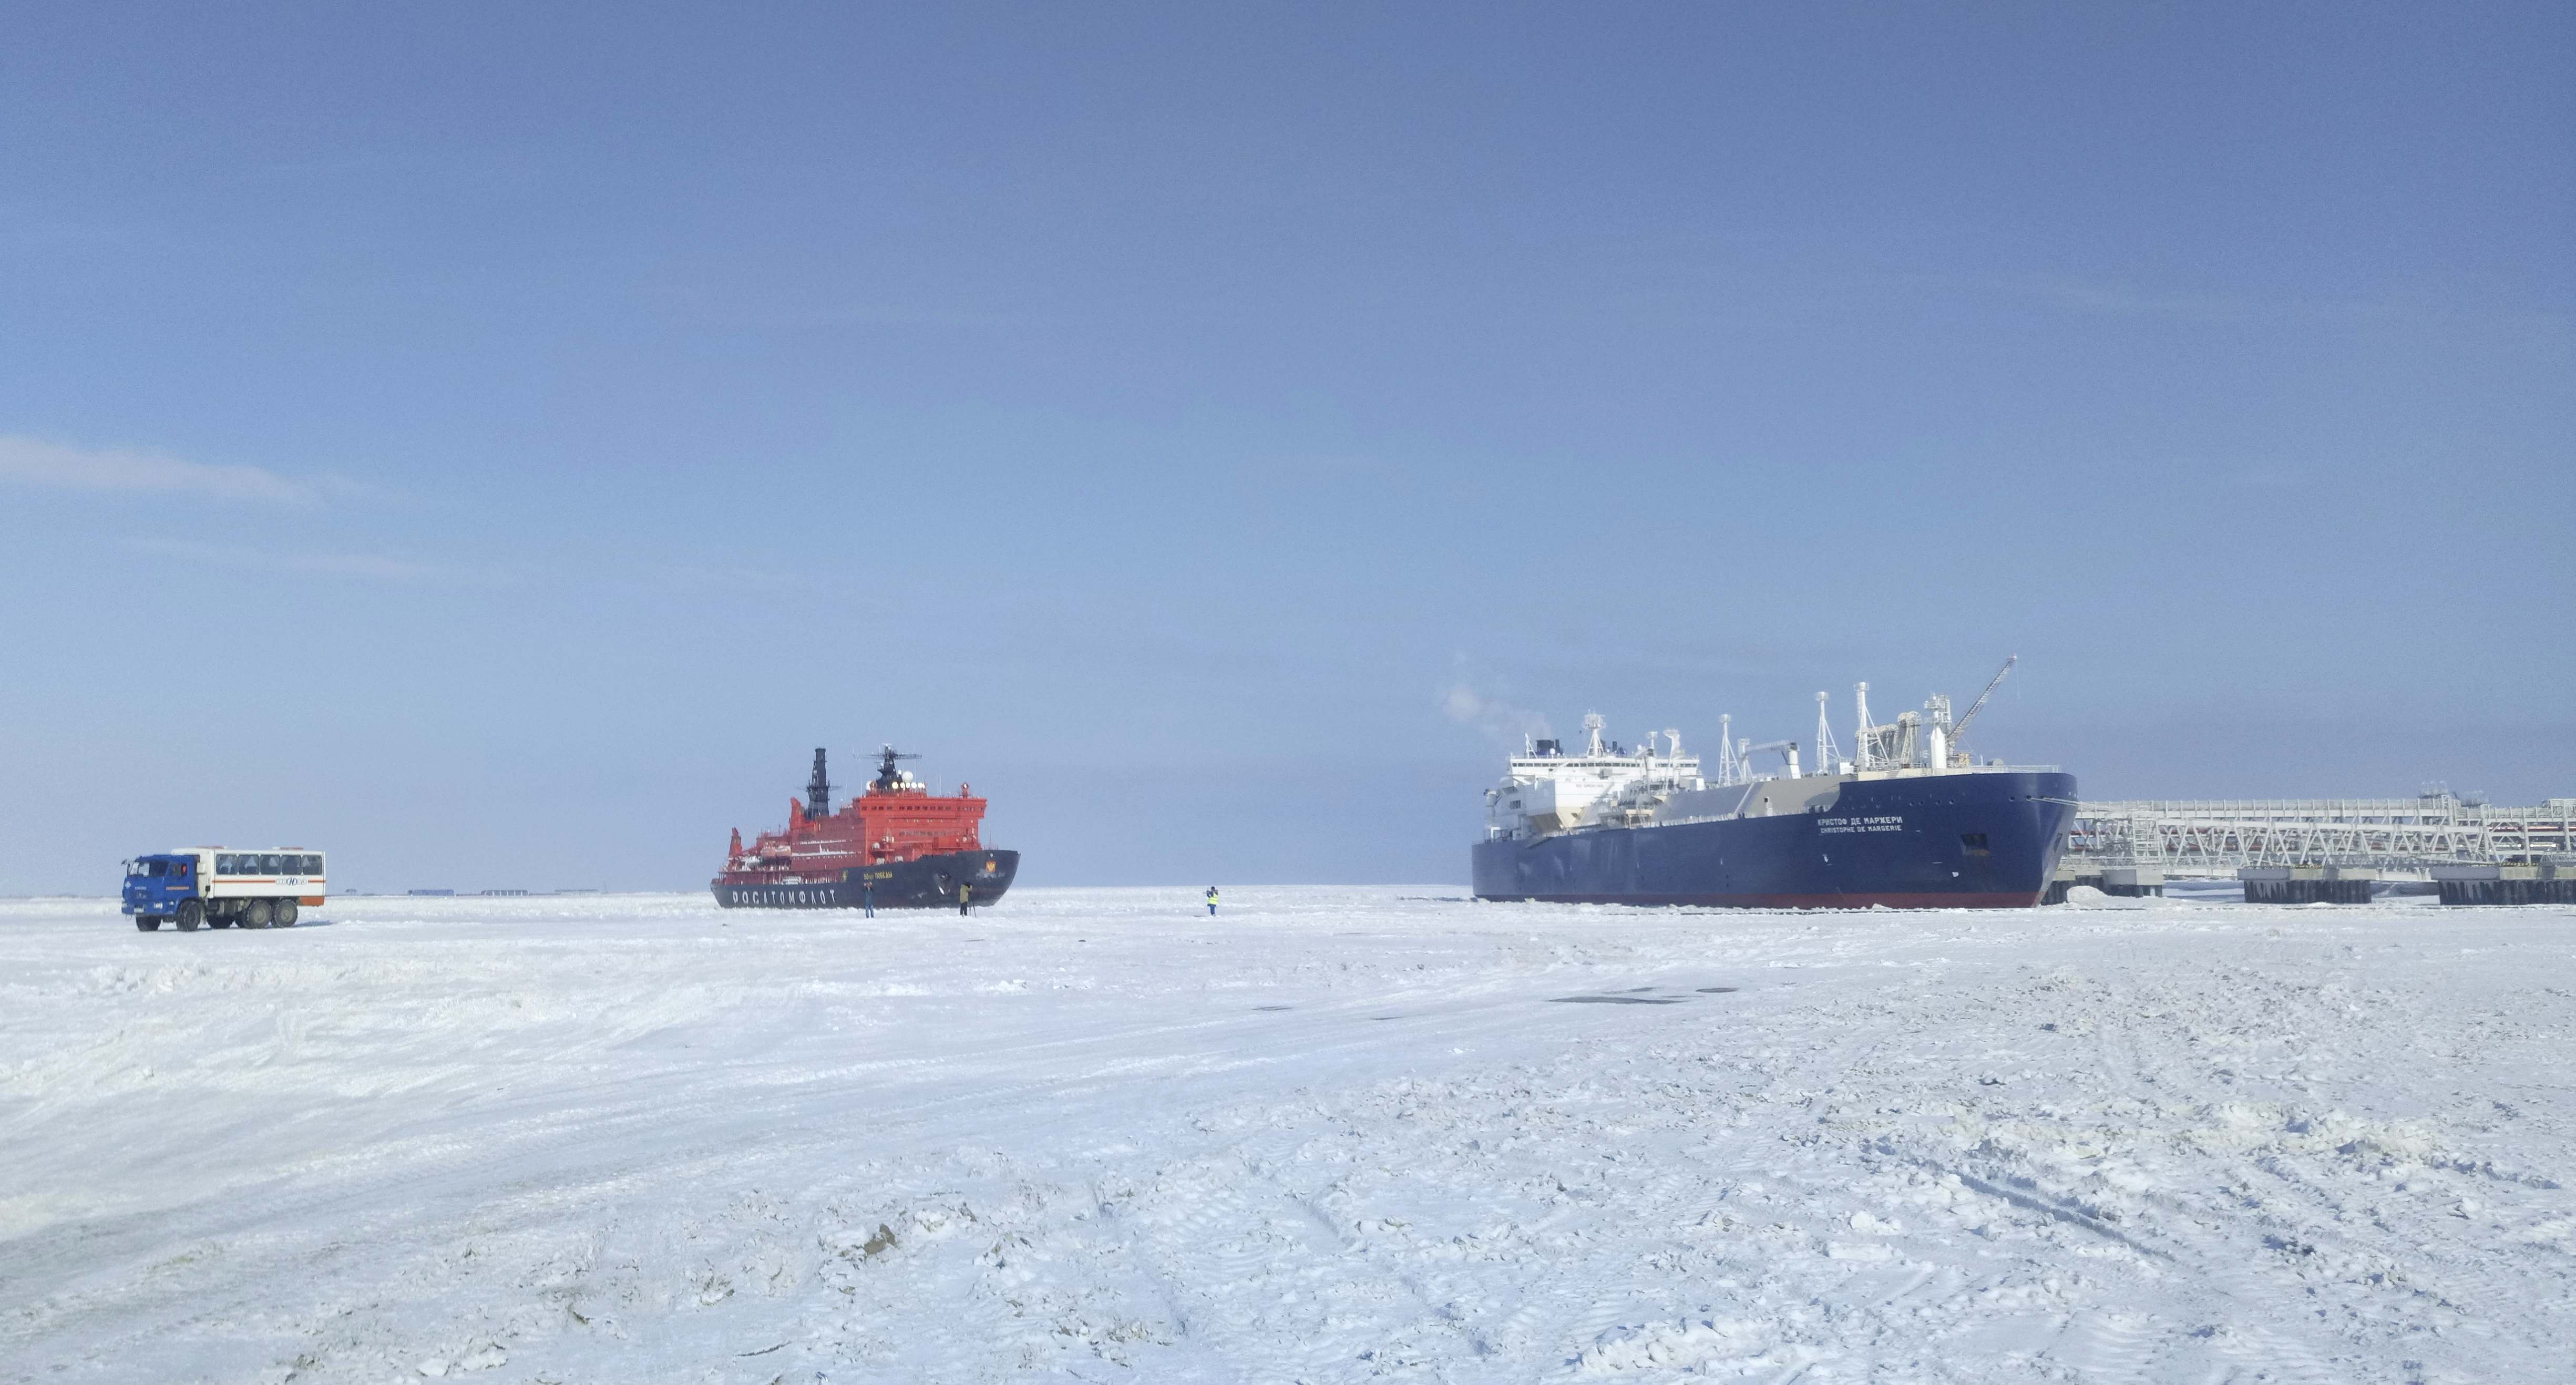 As the Arctic Ocean thaws, ice blows west, helping Russia’s shipping ambitions